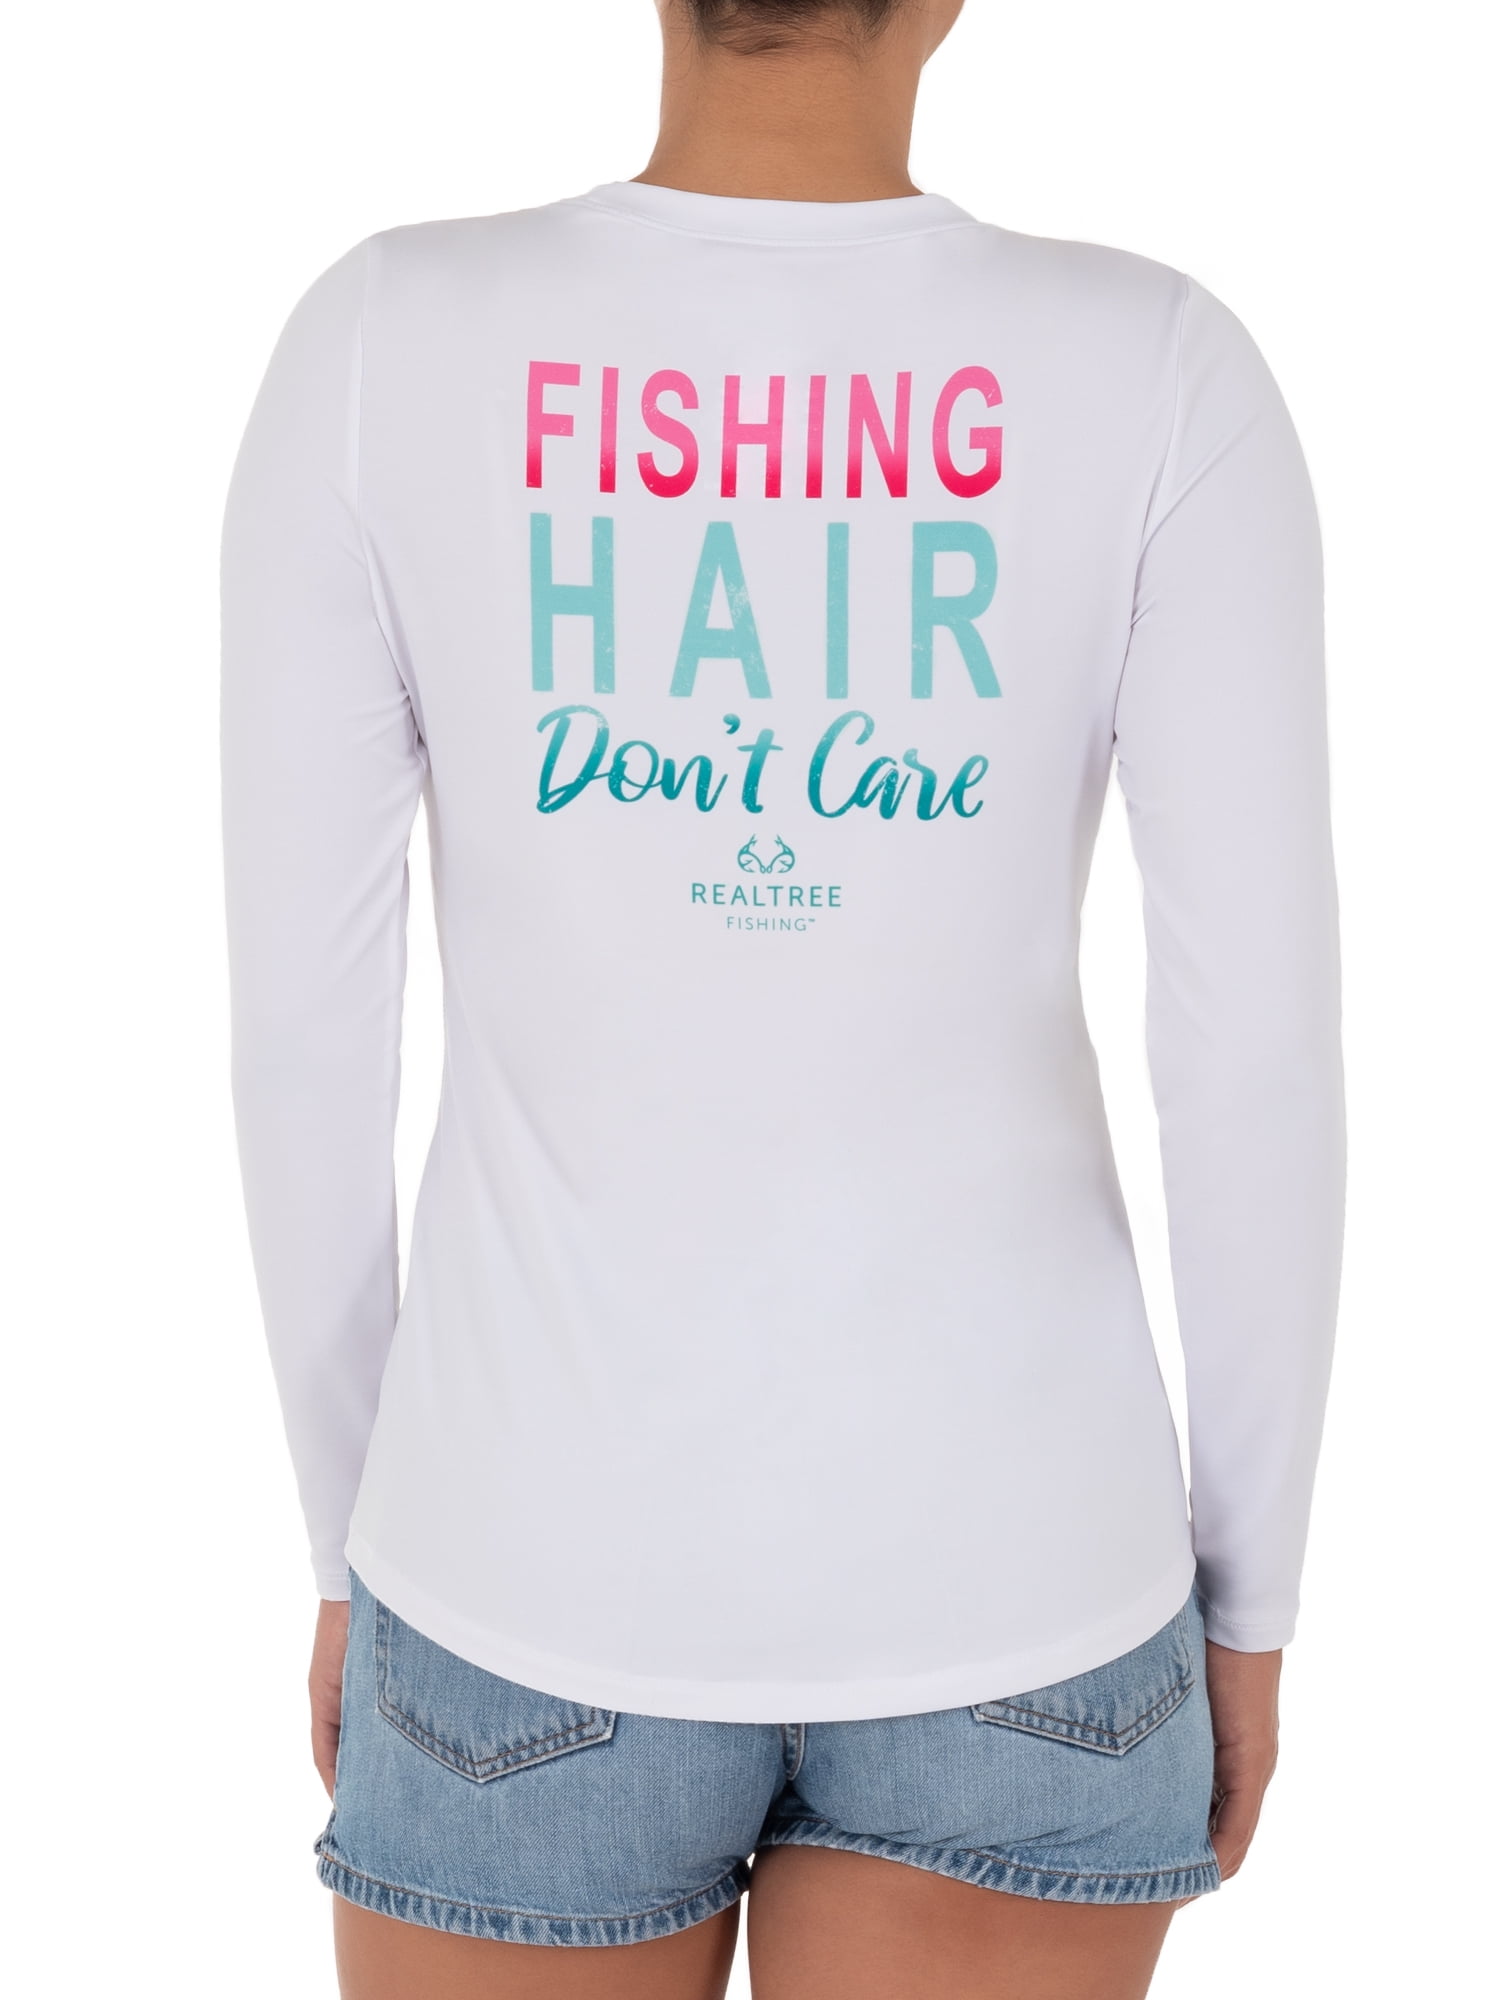 Women's Realtree Long Sleeve Performance Fishing Tee - I'm a Reel Catch  Graphic - M 